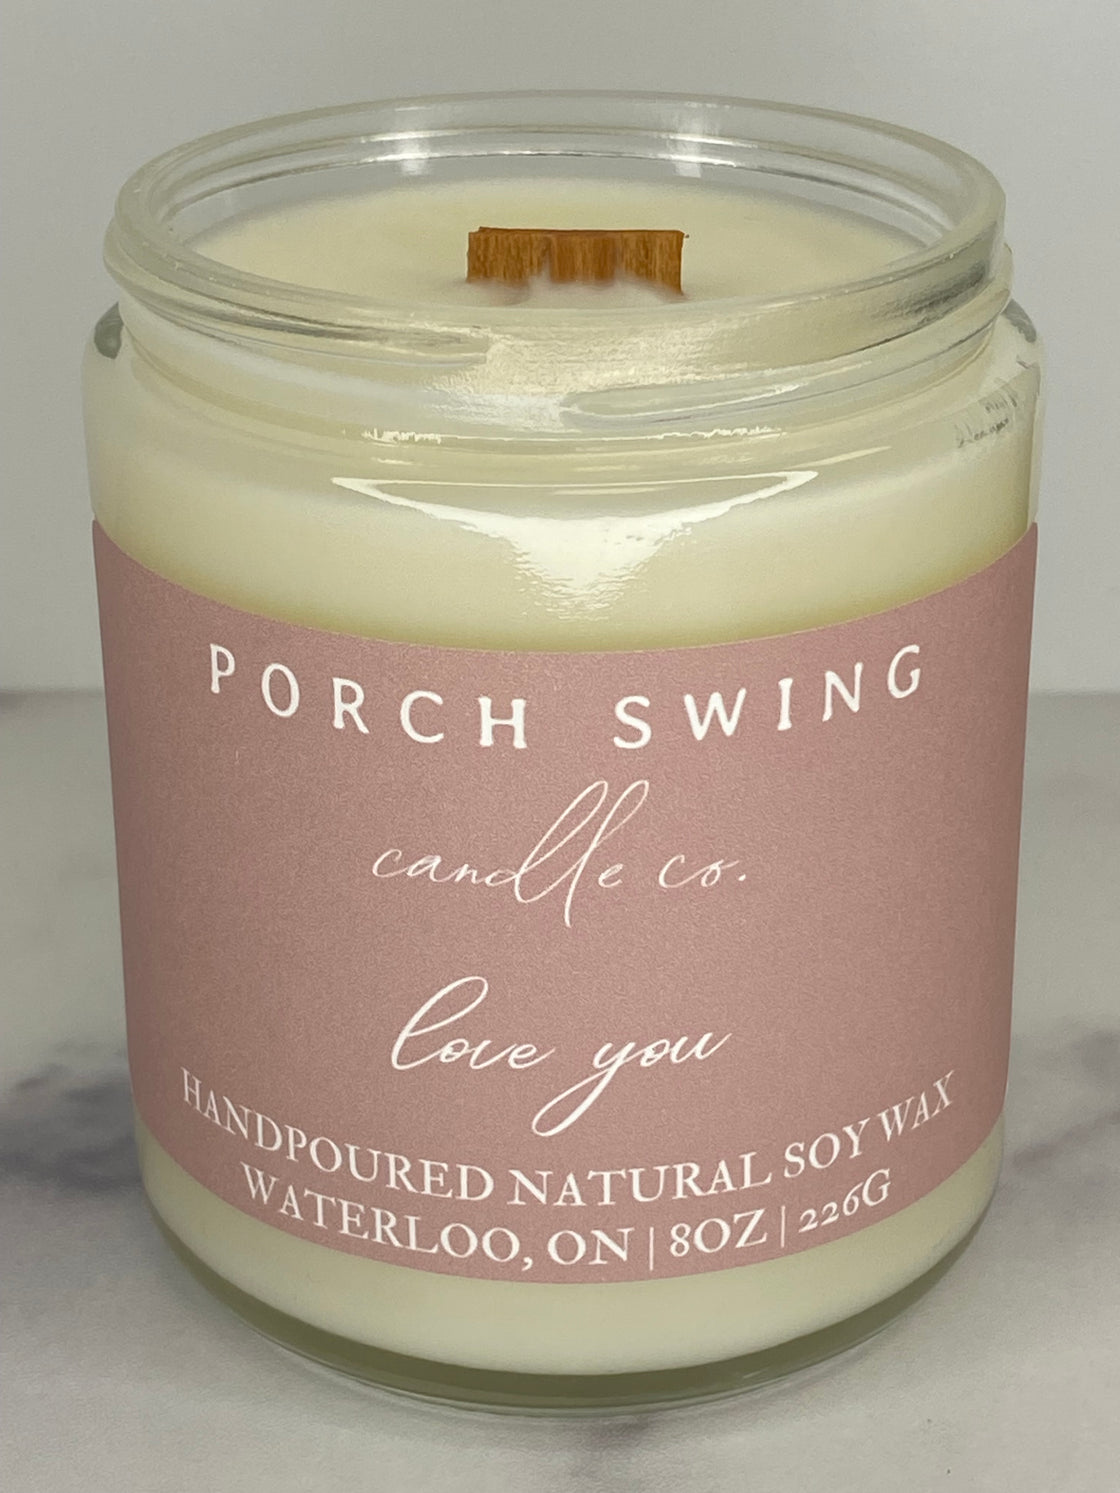 Porch Swing Valentine's Day Candles